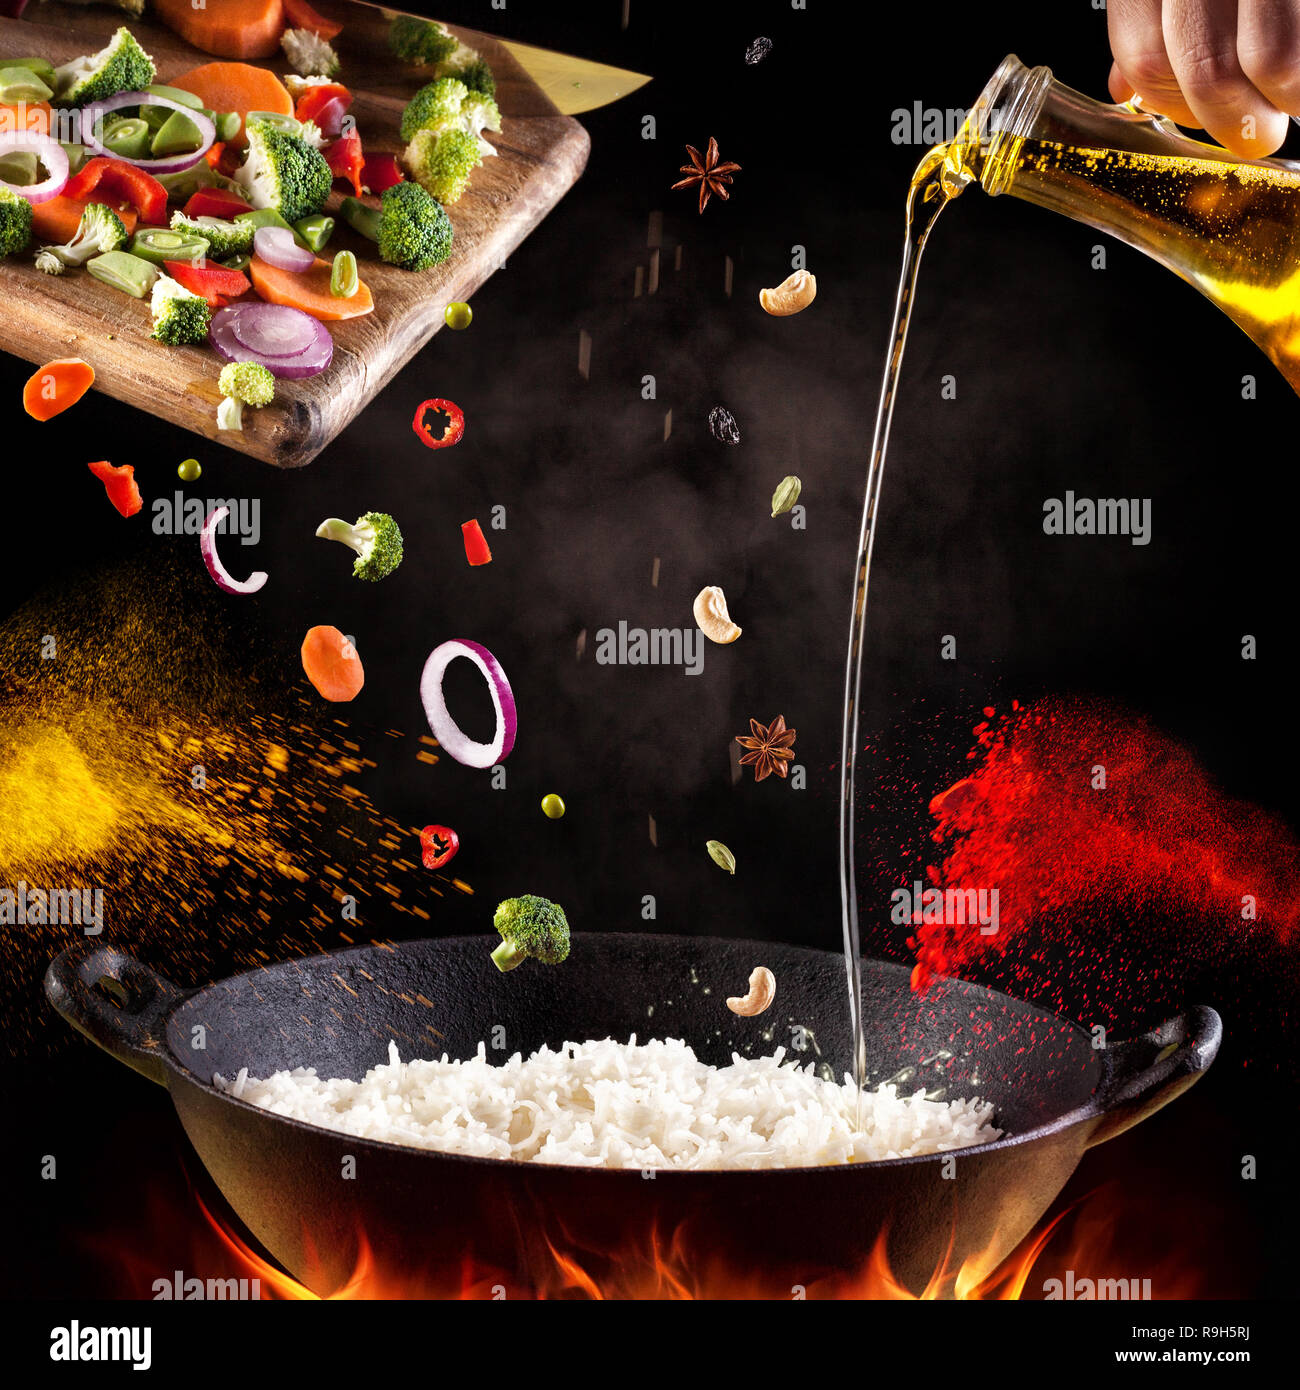 Indian vegetarian biryani with vegetables and spices in cooking process on black background Stock Photo